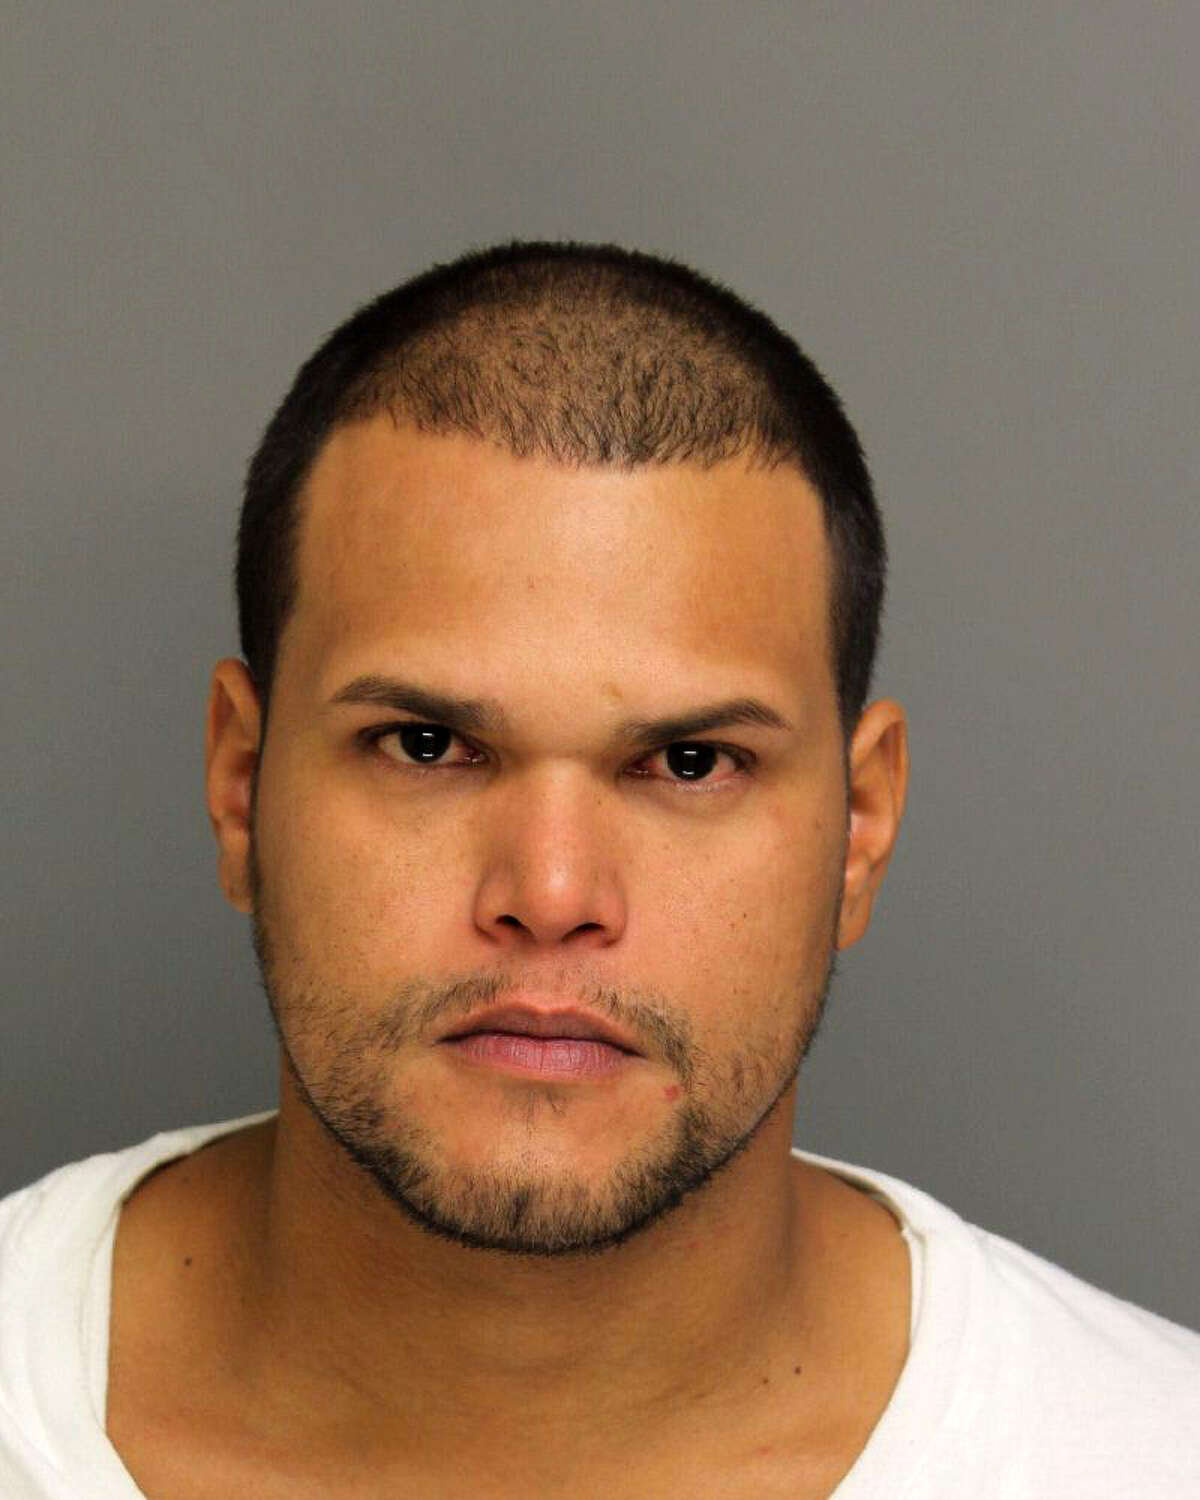 Nelson Vega, of Stratford who was arrested for a non-violent burglary, is the subject of a manhunt. Vega managed to escape on October 21, 2015 while he was being transferred from the Bridgeport Police Department to the Golden Hill St. courthouse.